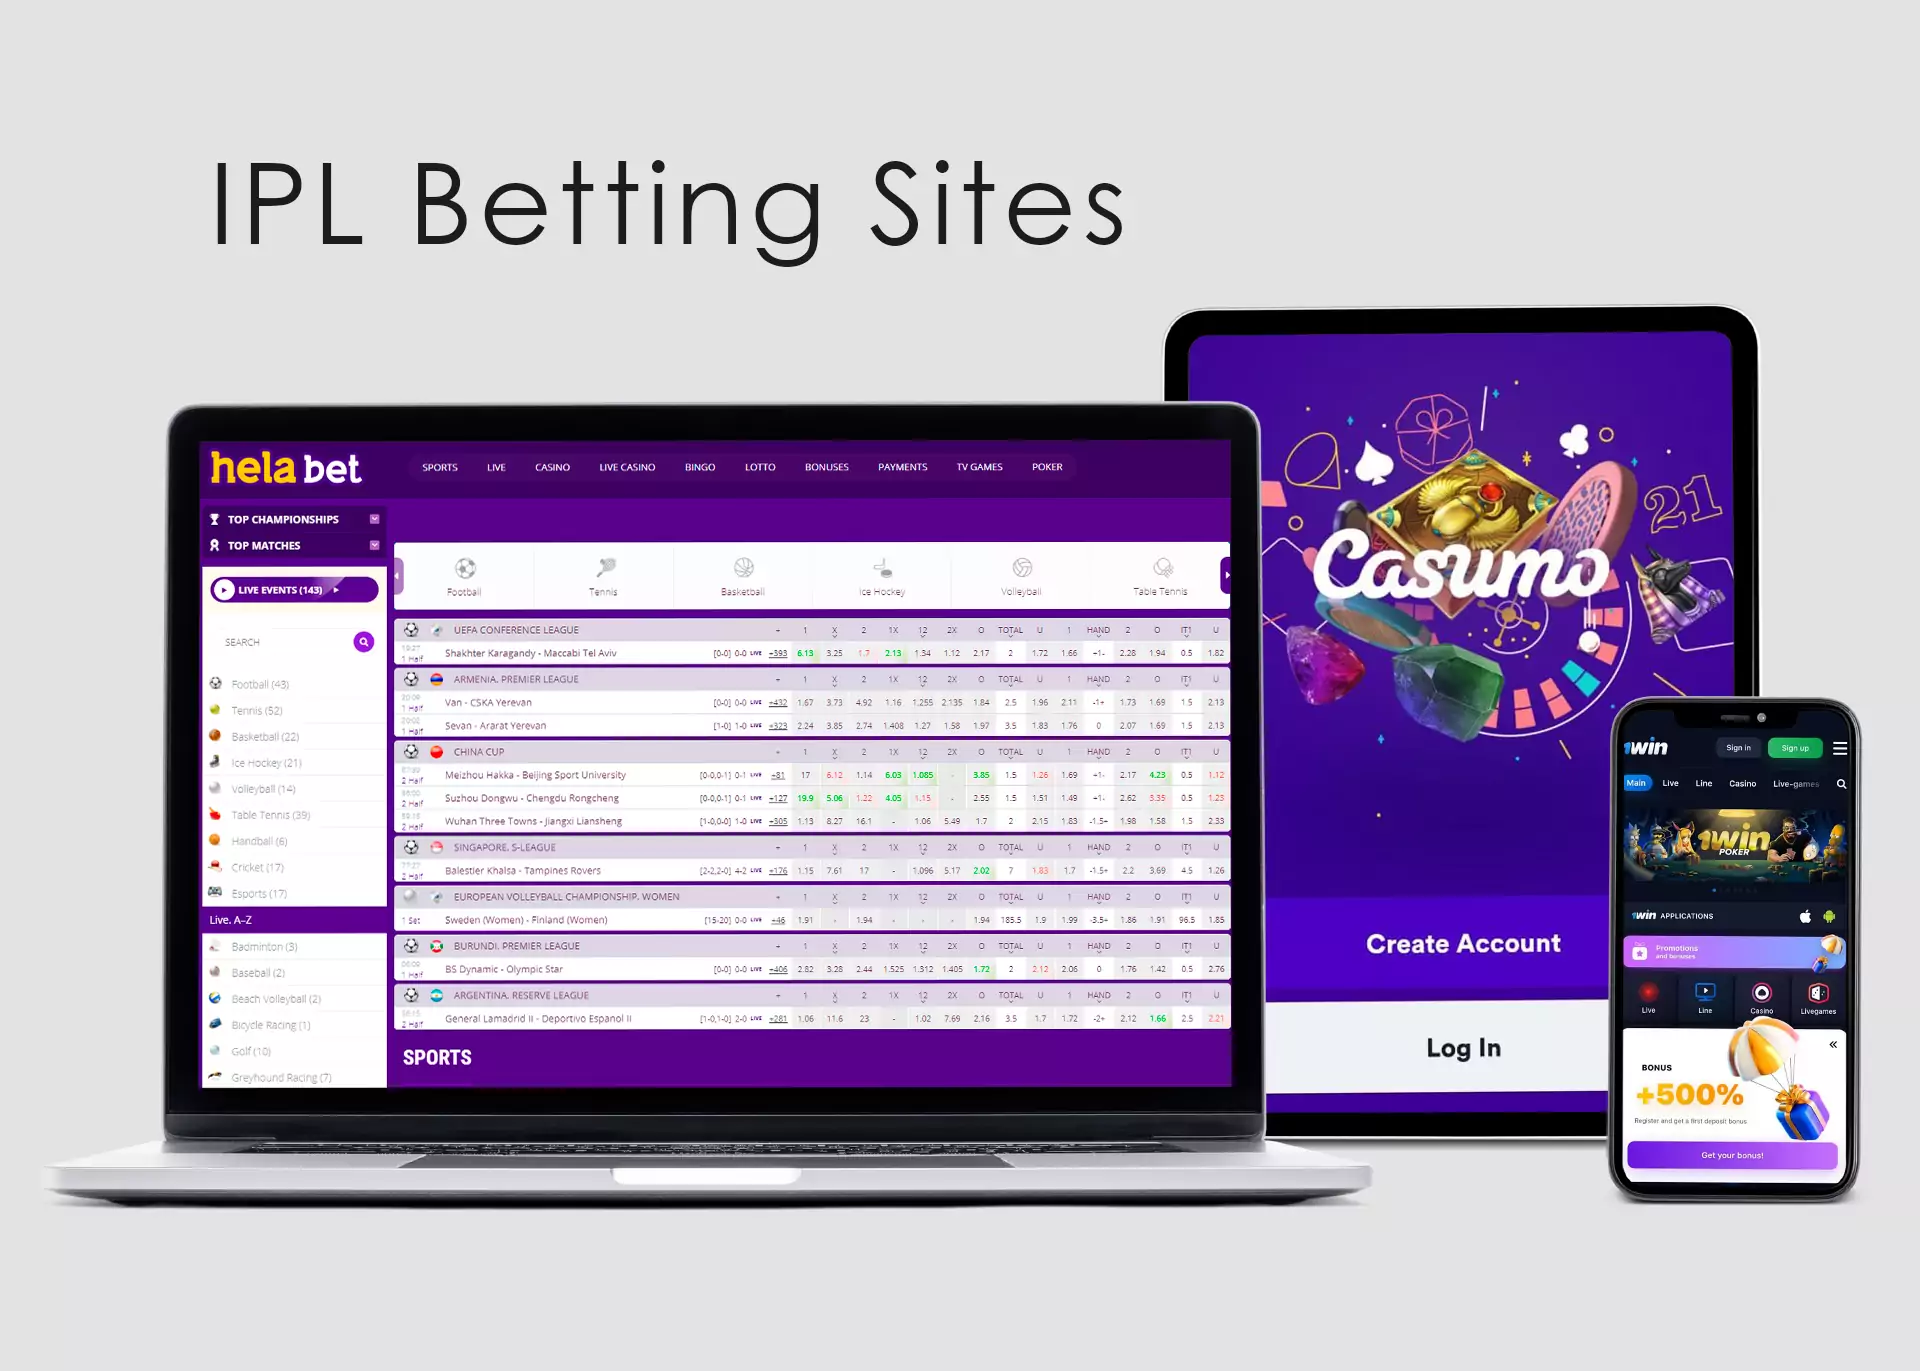 Users from India can bet on the IPL on sites from our list.